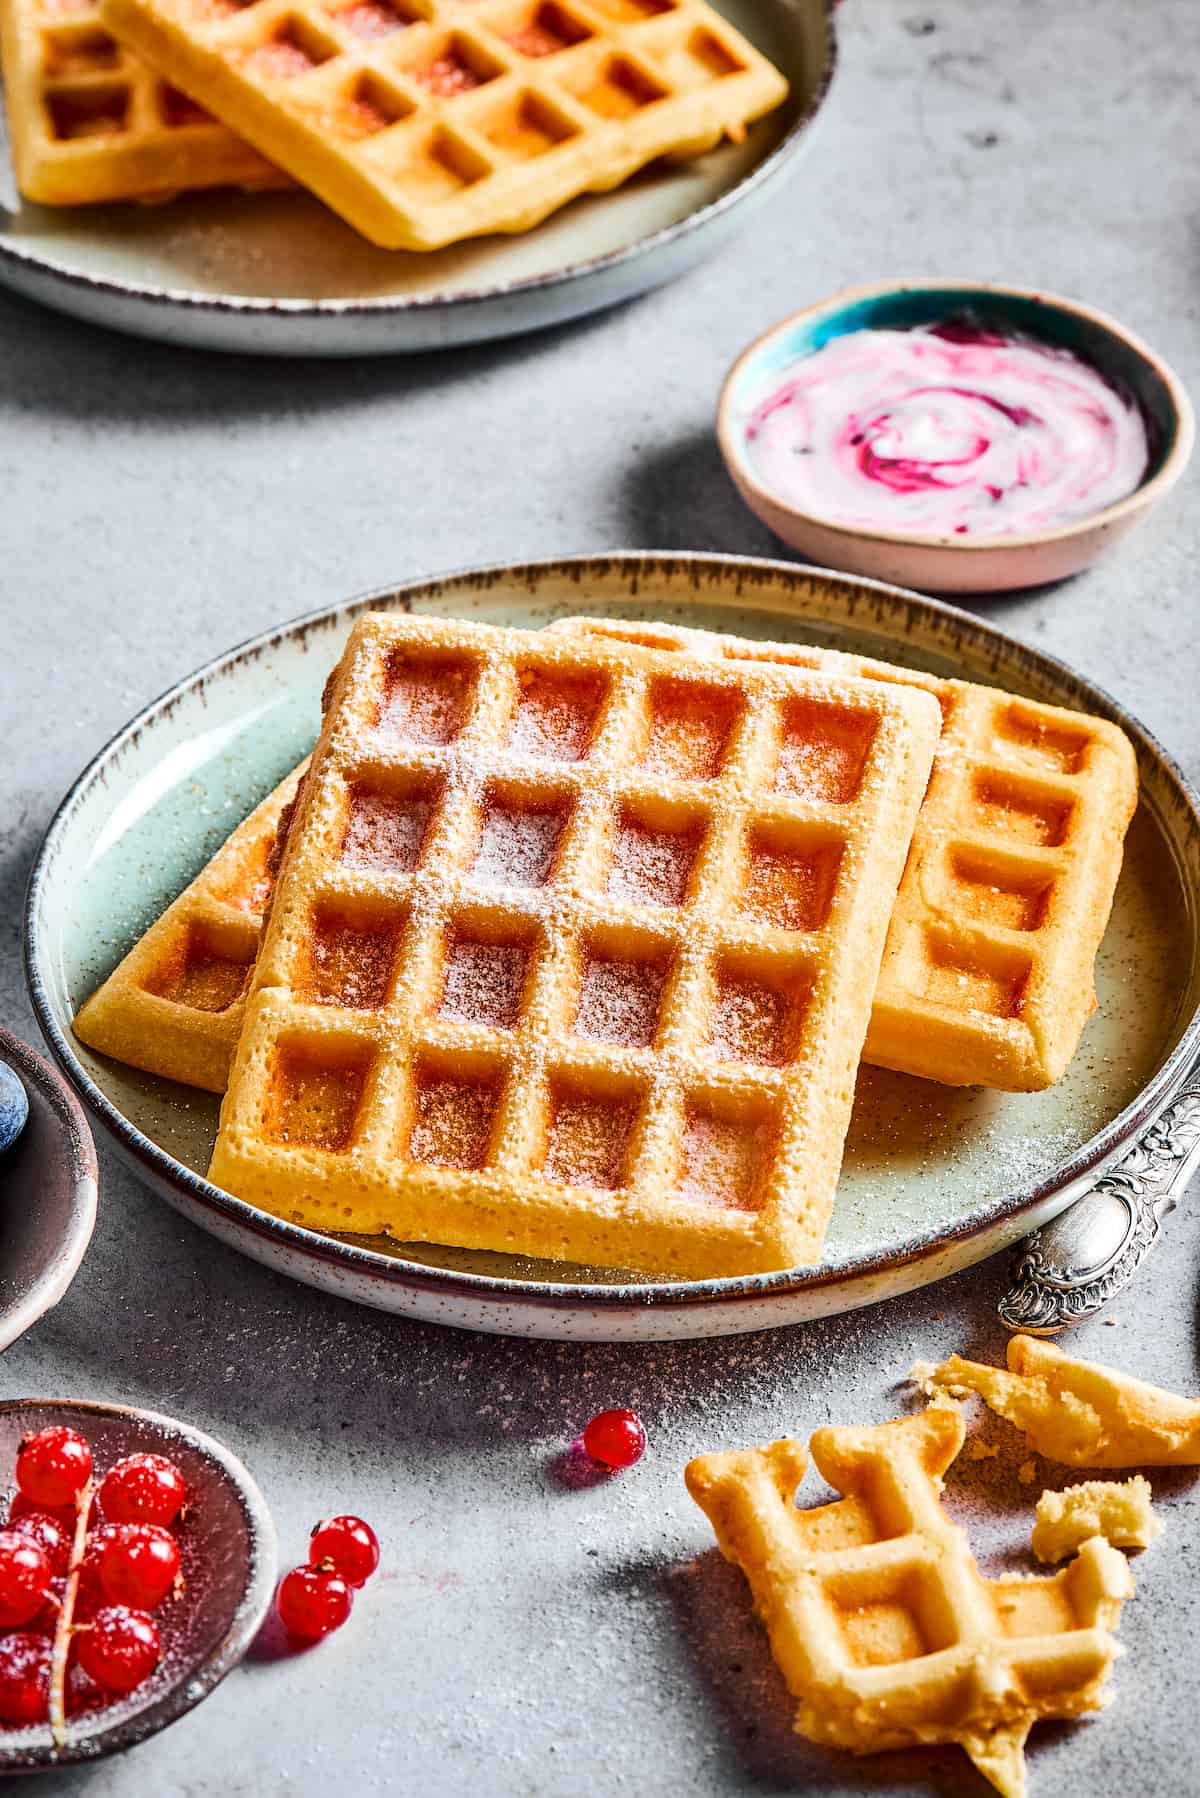 Plates of waffles on a gray work surface with dishes of berry yogurt and currants.